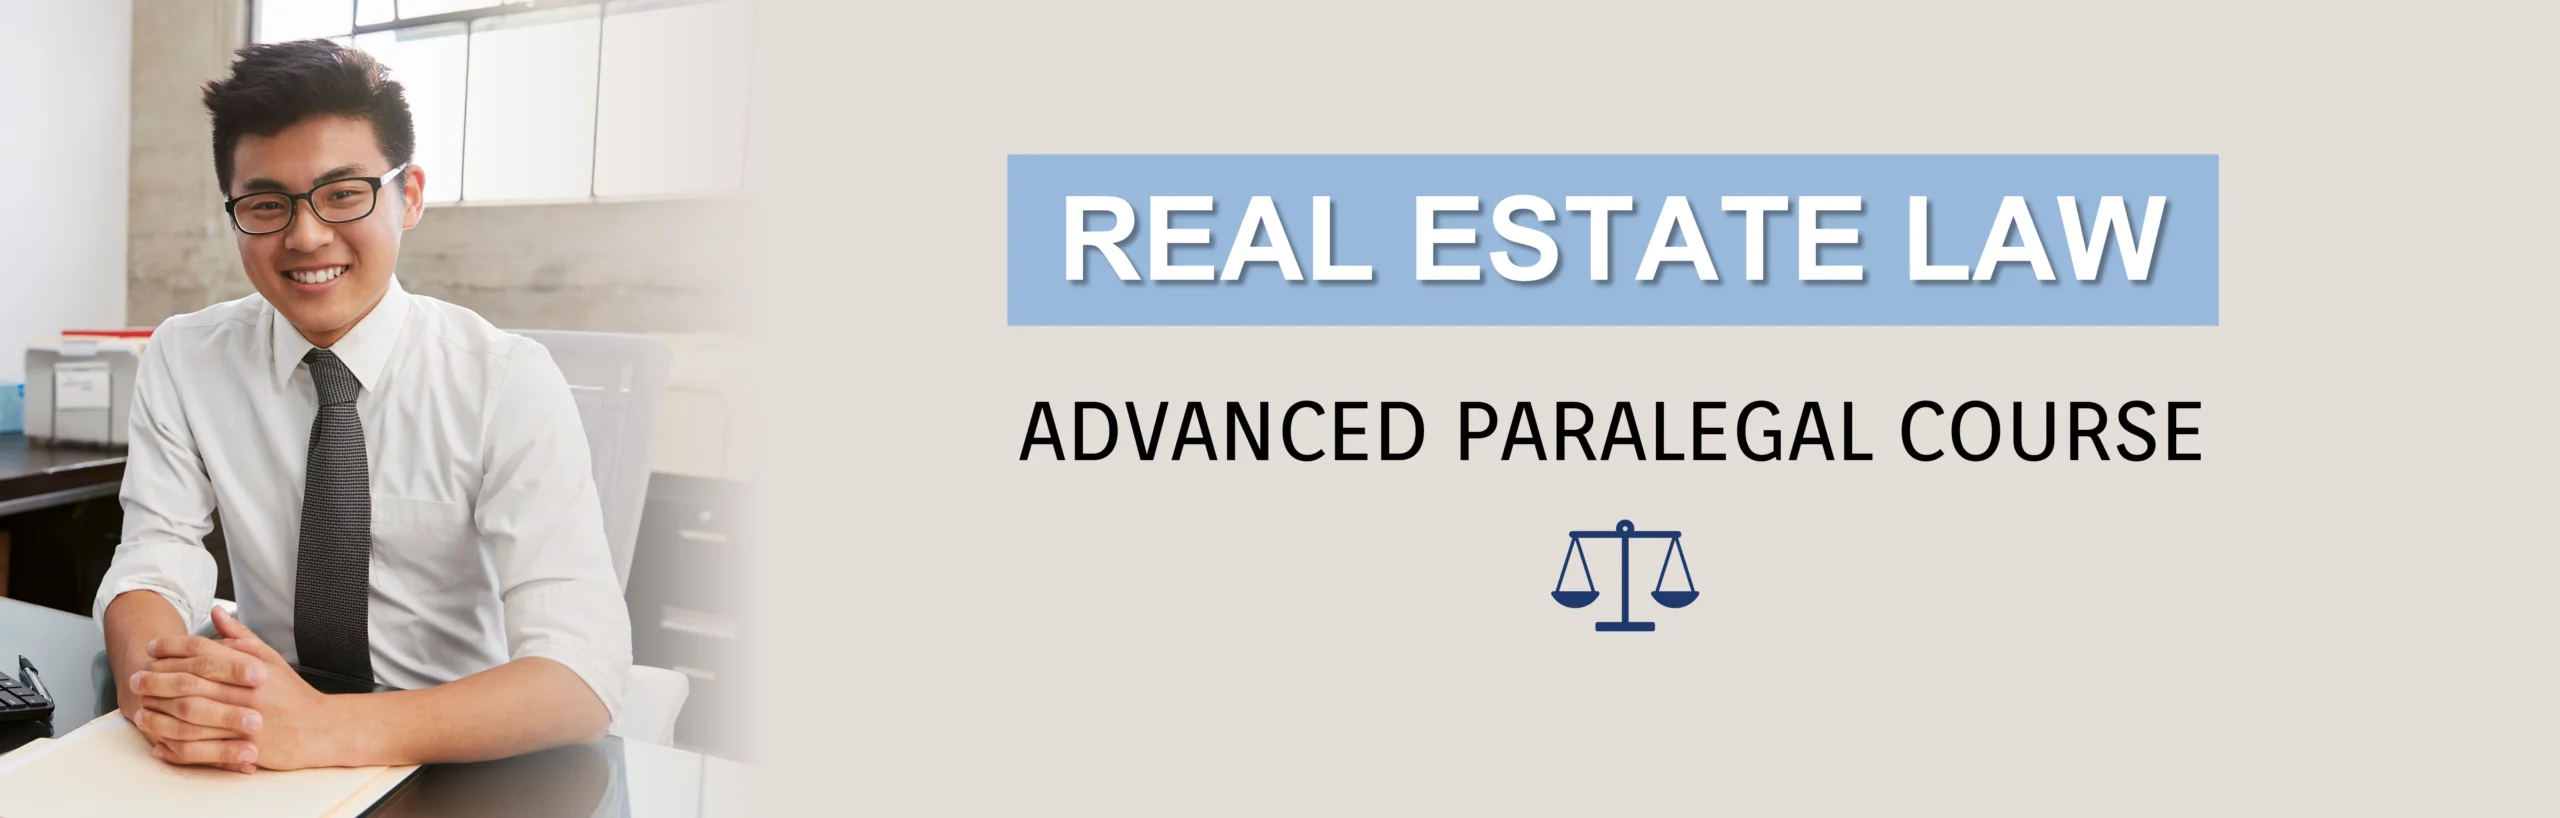 Real Estate Law Advanced Paralegal Course